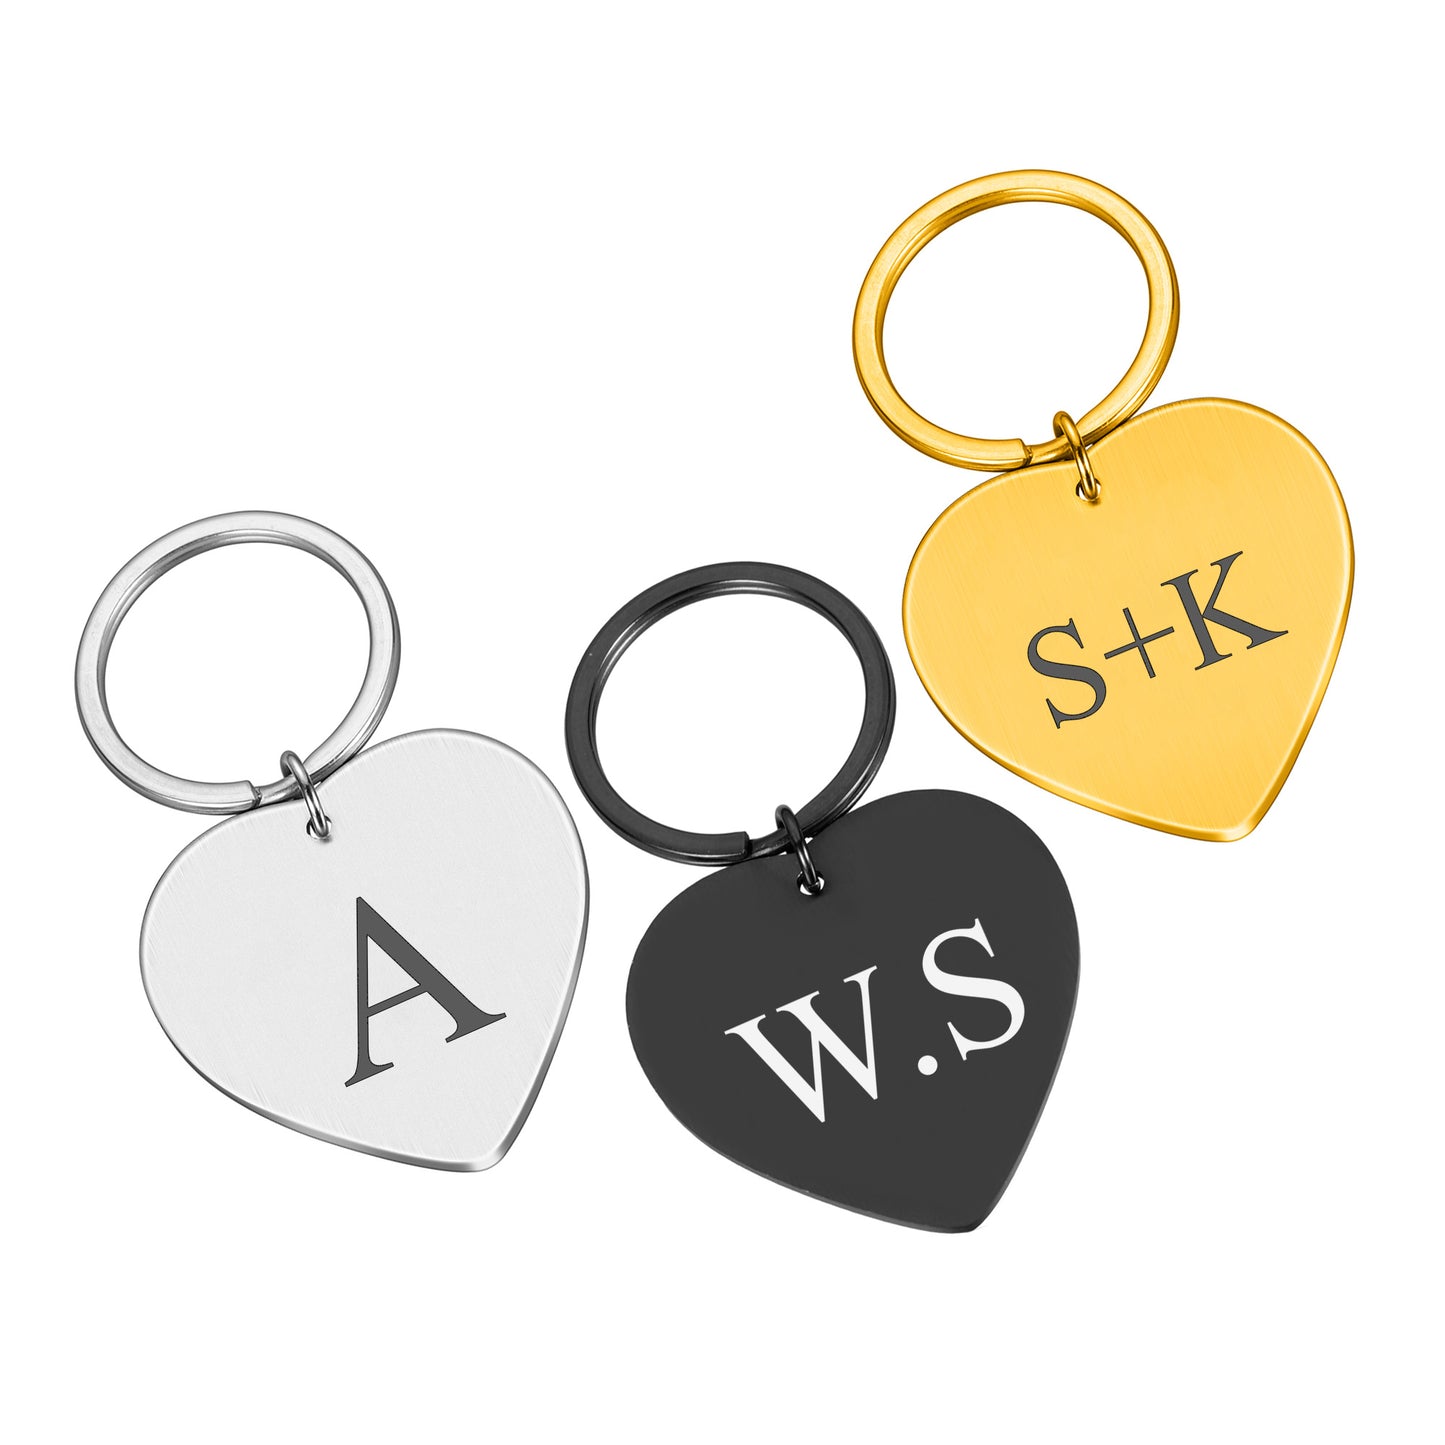 Laser Engraved Metal Heart Custom Alphabets Letters Initials Key ring Gift